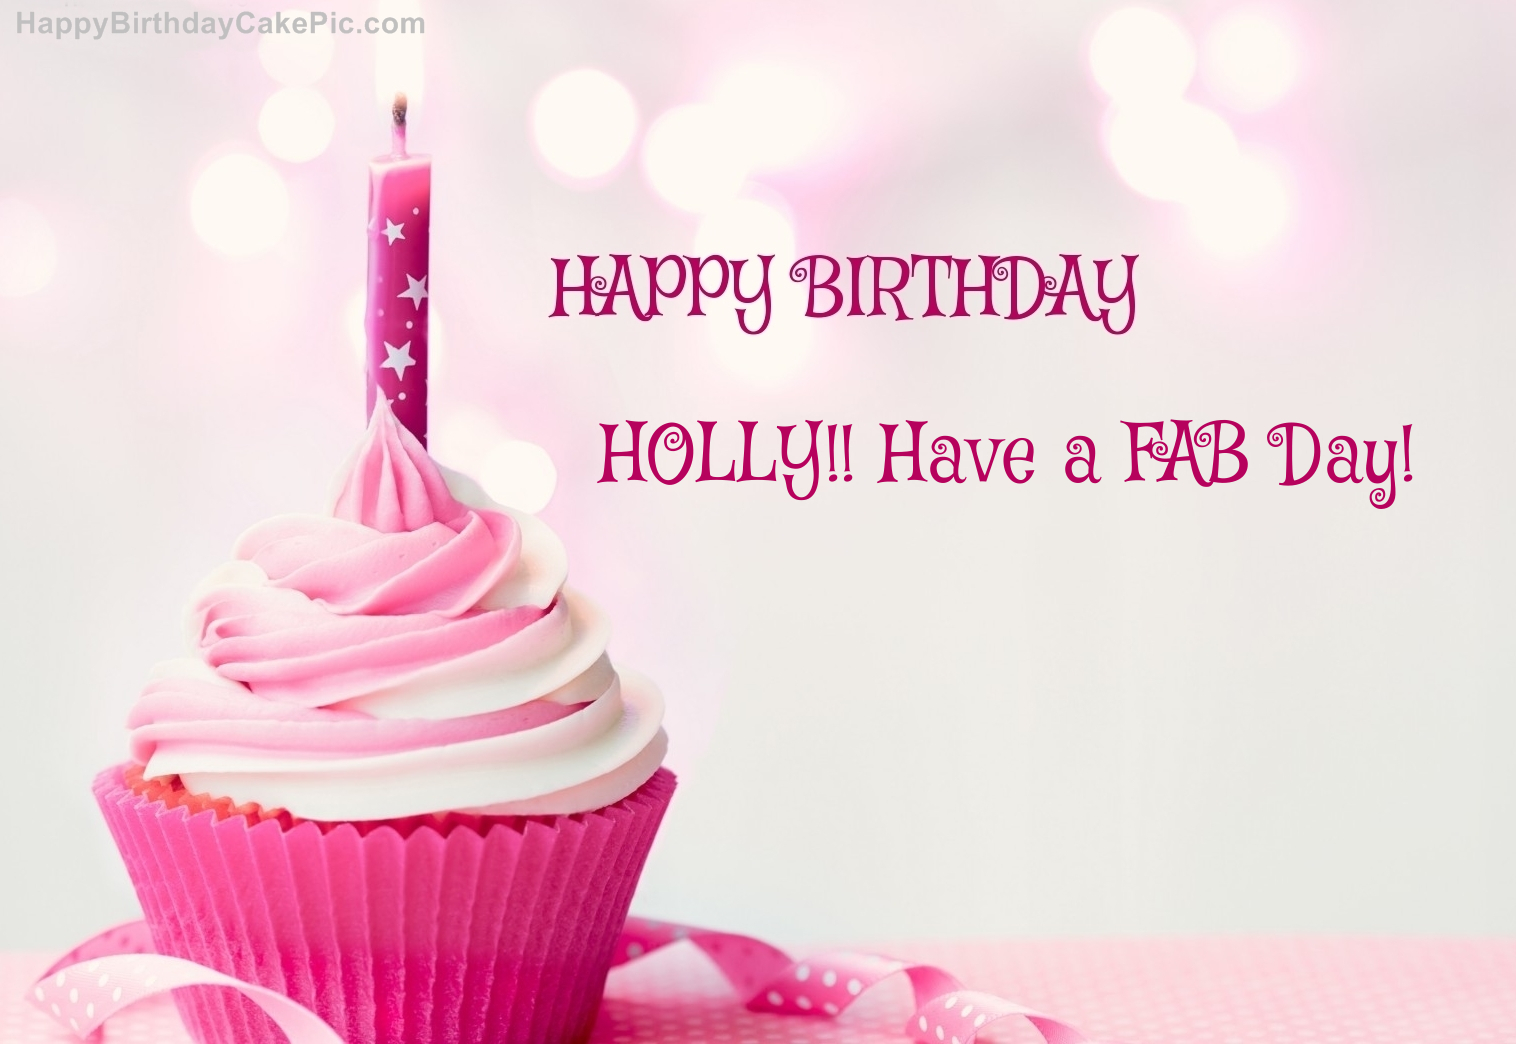 happy-birthday-cupcake-candle-pink-picture-for-HOLLY!!%20Have%20a%20FAB%20Day!.jpg